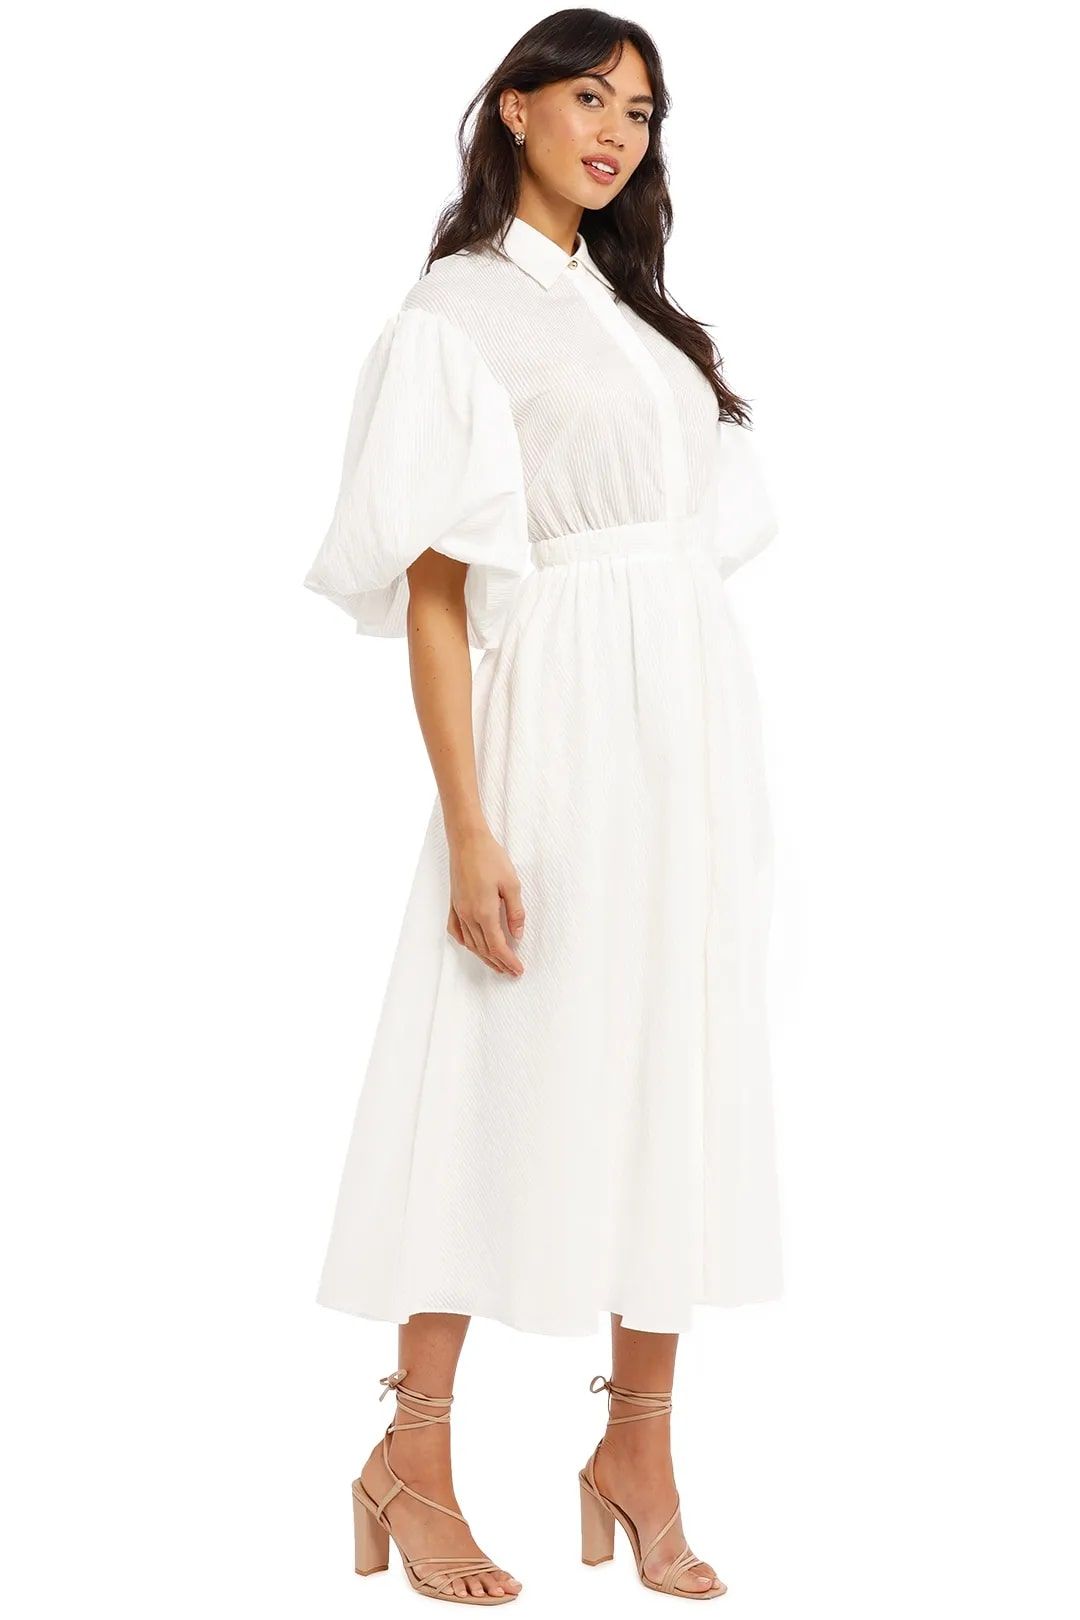 Rent Glebe dress in ivory for spring events.